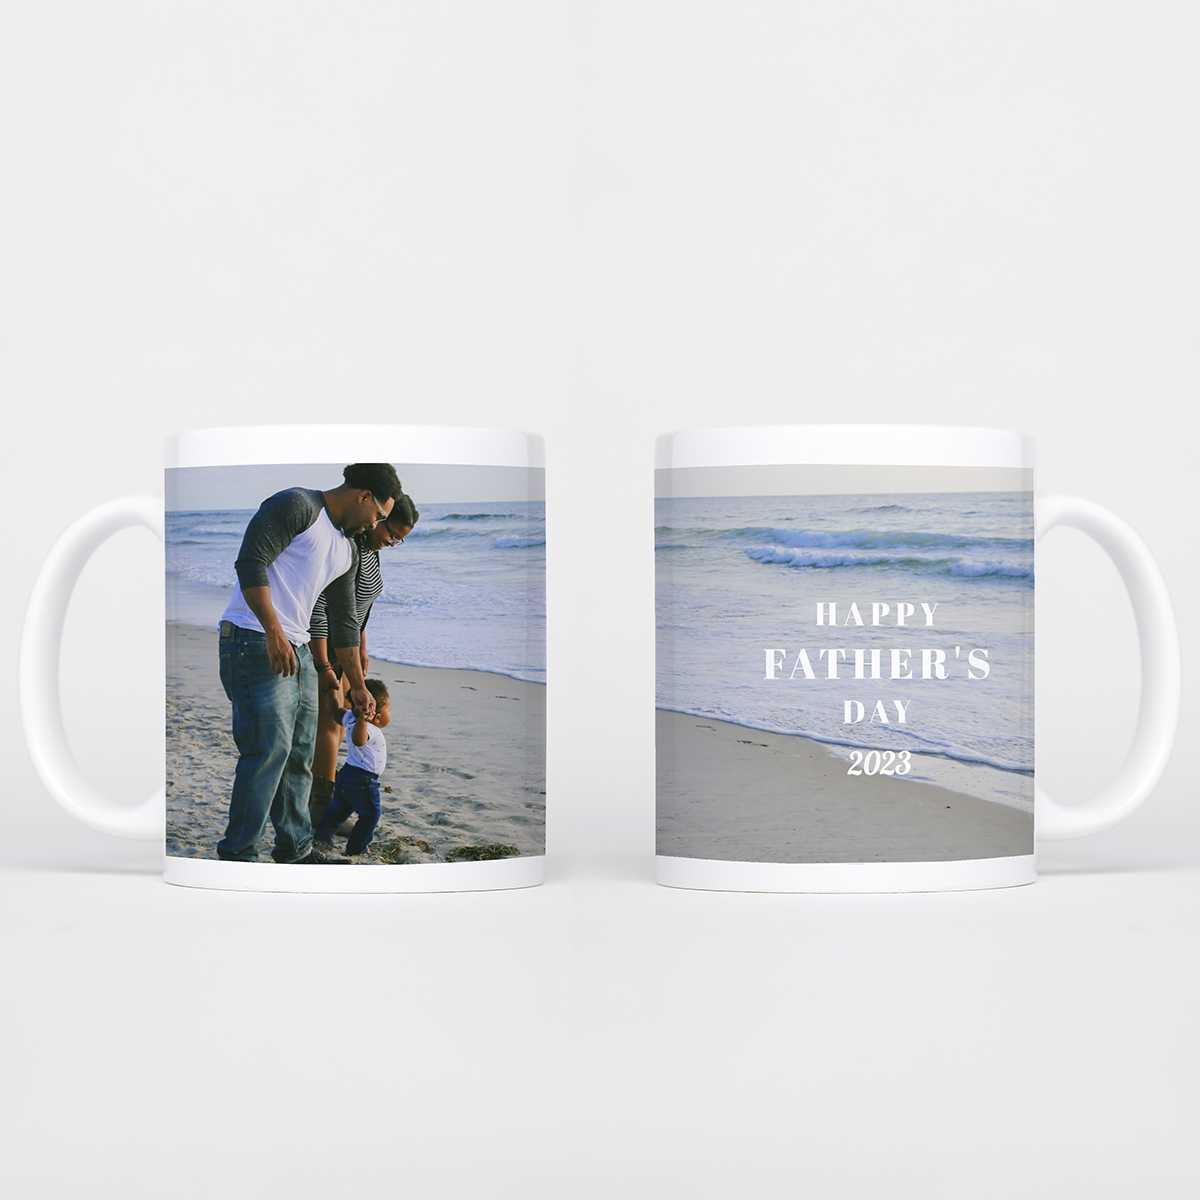 Dad mug with an image of a family at the beach